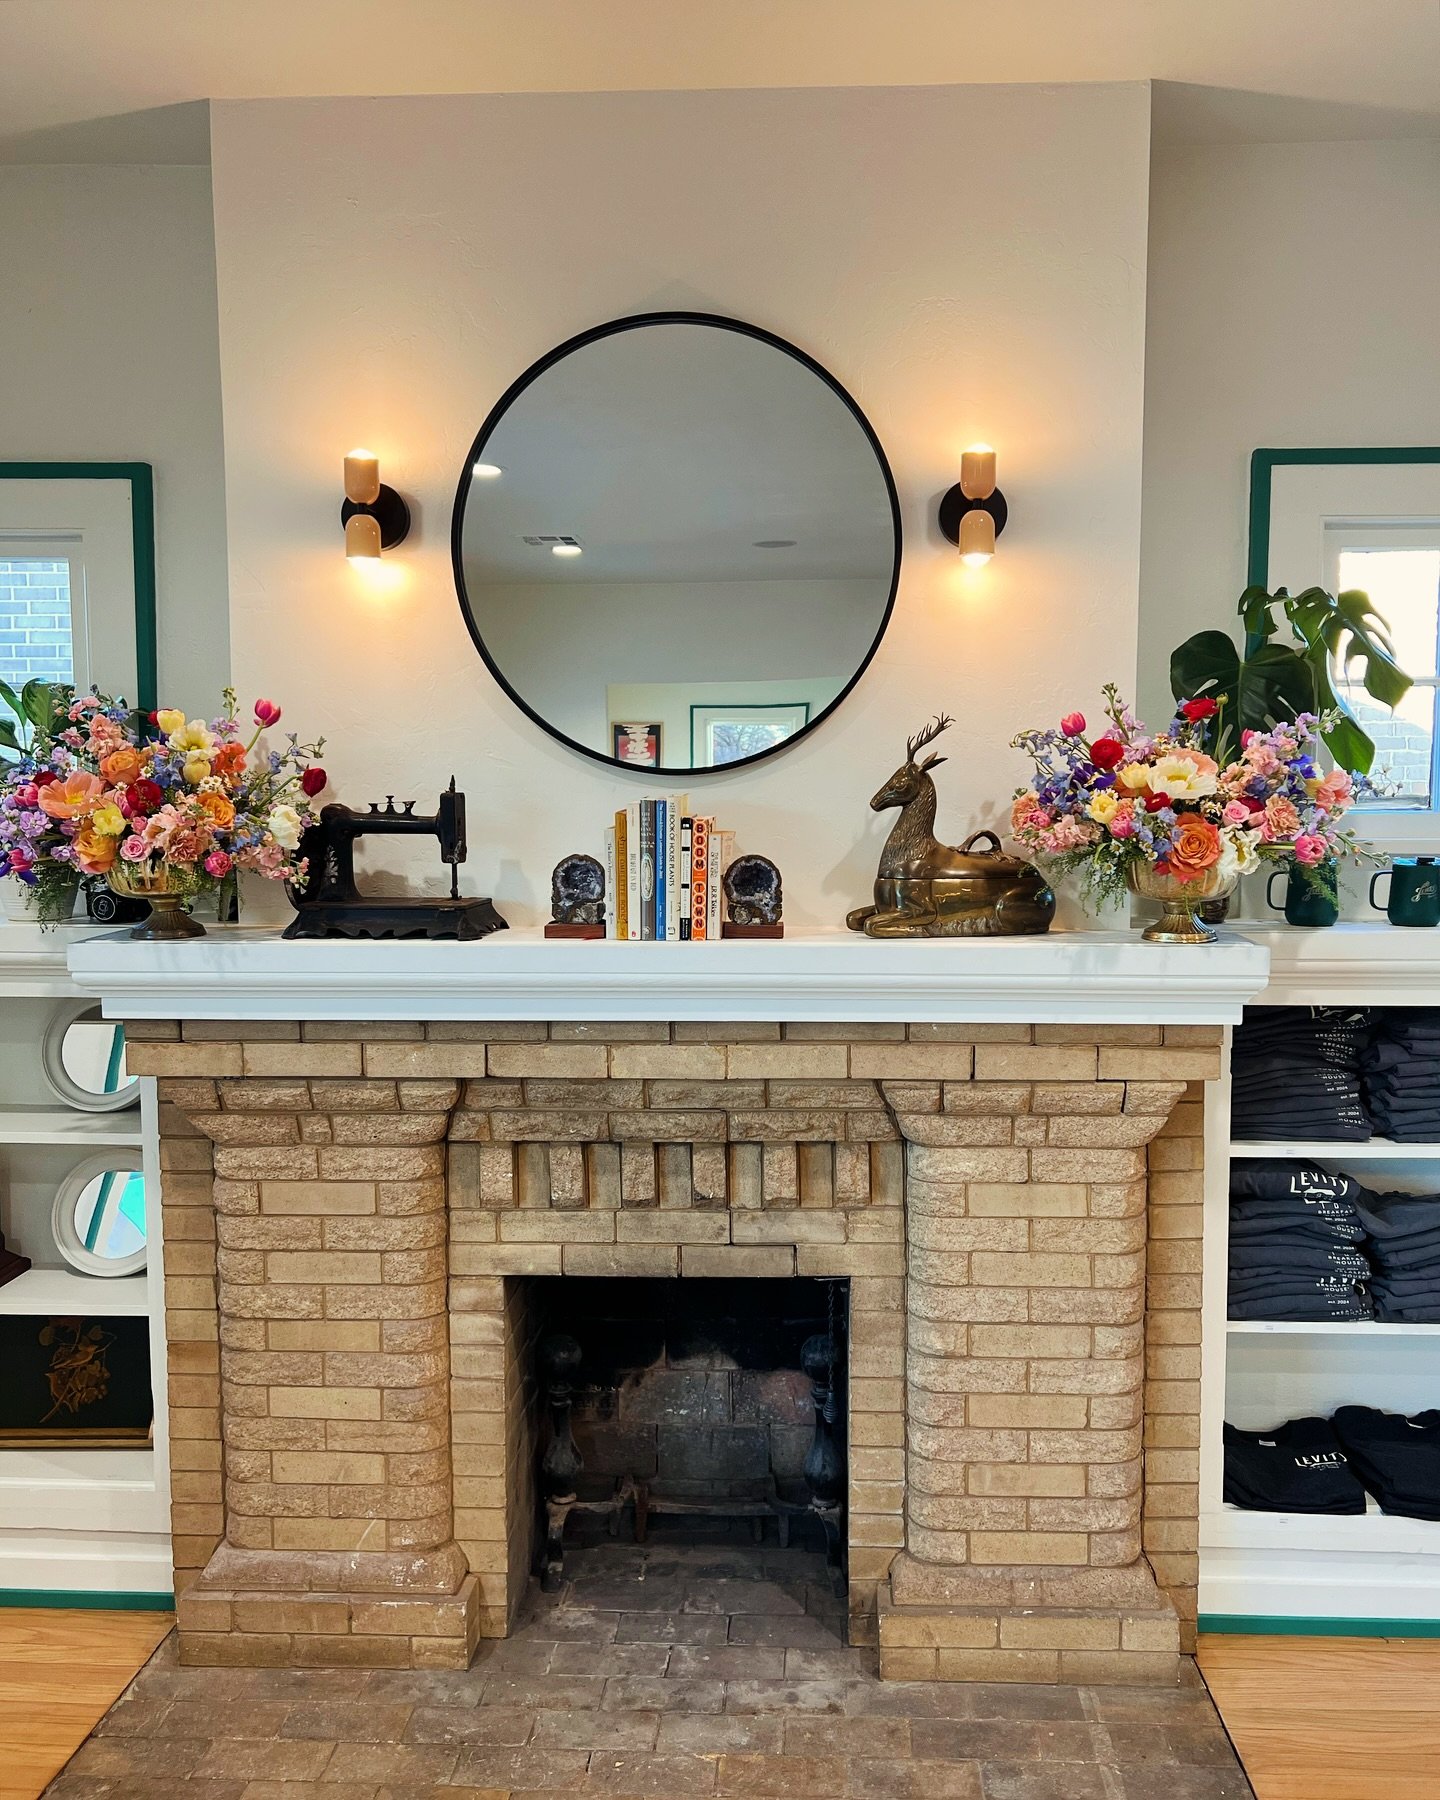 Did you know that the Levity house was built in the 1920&rsquo;s? This fireplace is original to the home, and while it no longer functions, it serves as a reminder to the beauty and charm of that era. This home has many special quirks that we hope yo